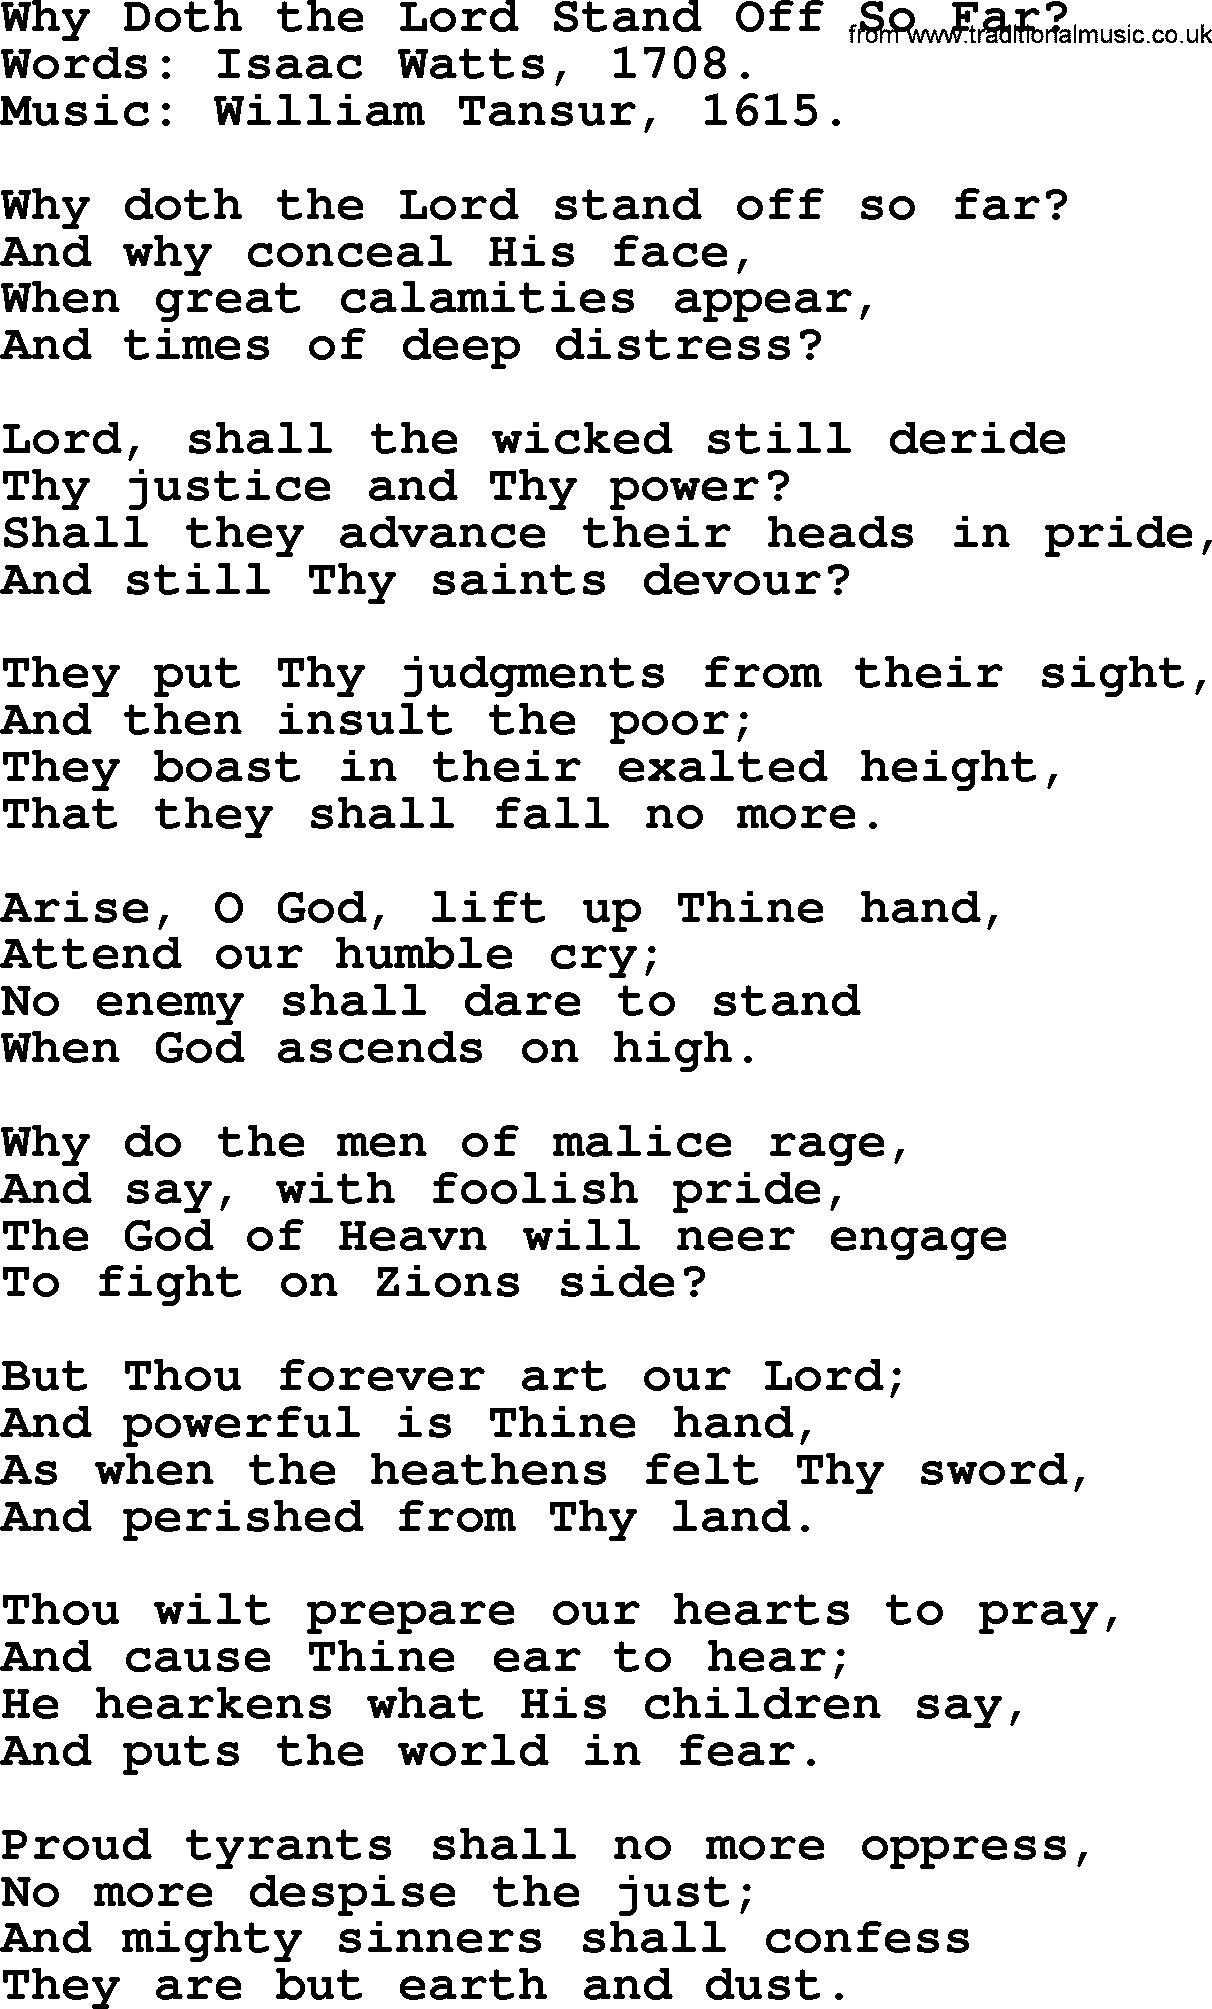 Isaac Watts Christian hymn: Why Doth the Lord Stand Off So Far_- lyricss